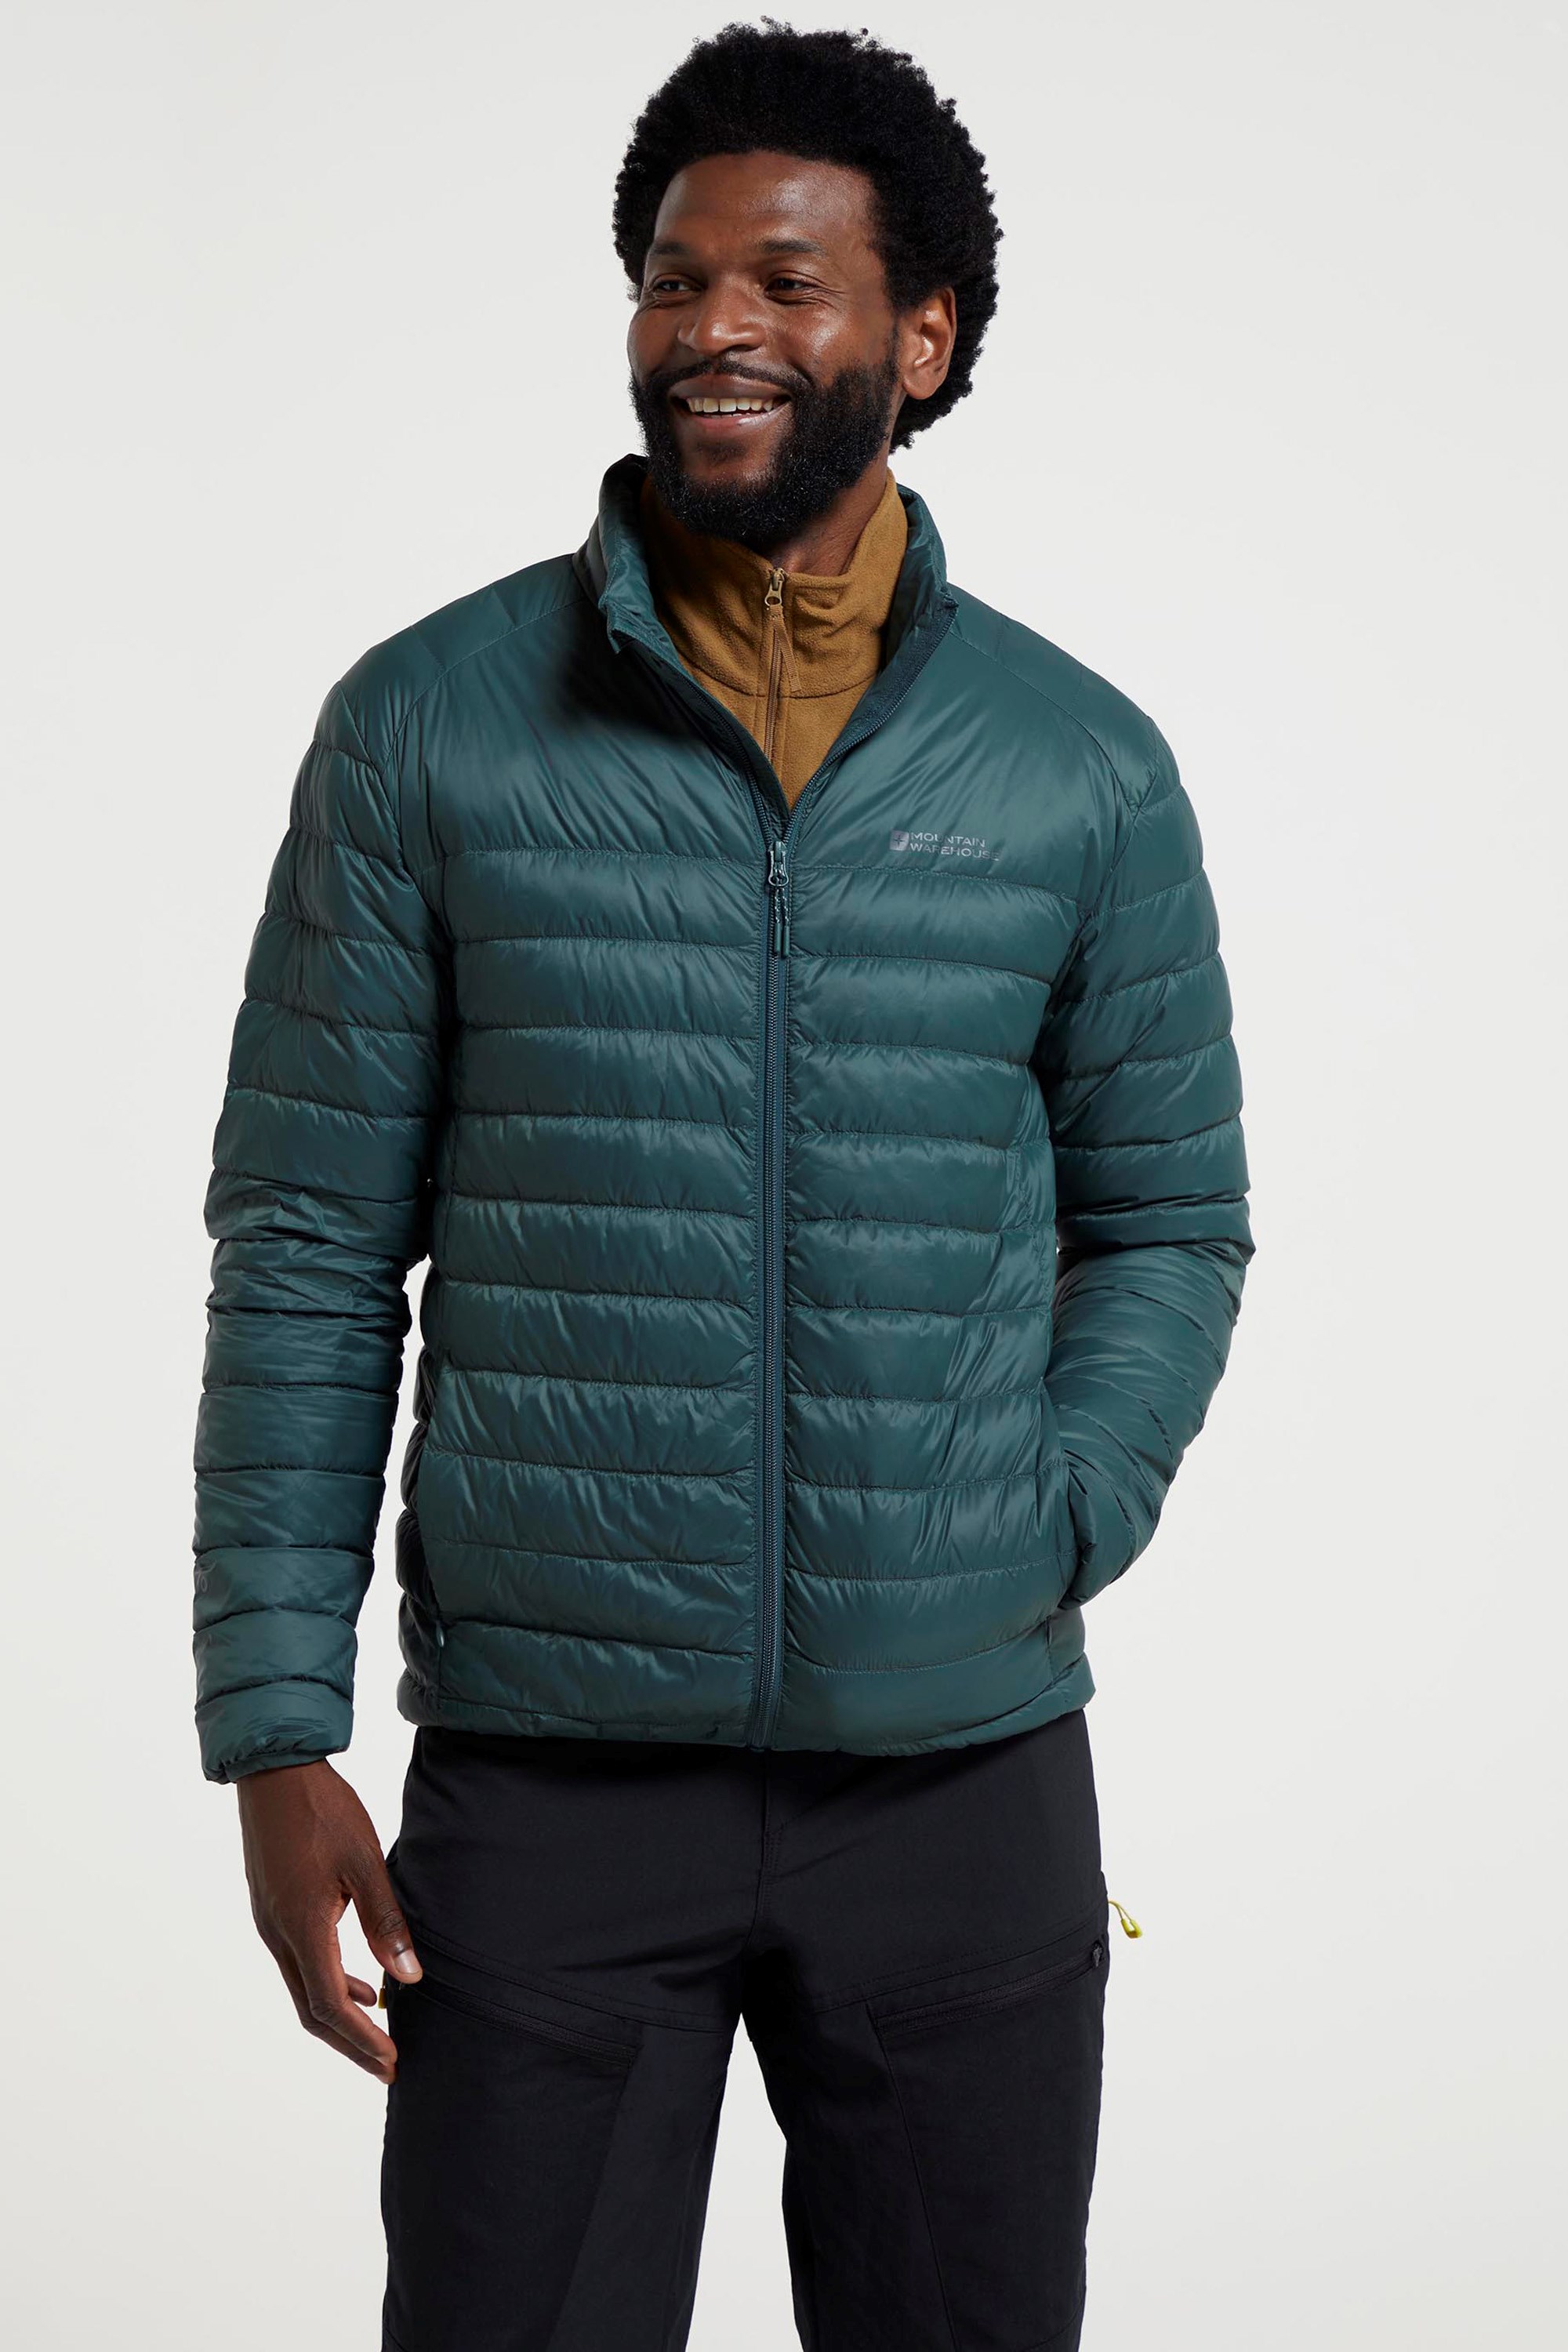 Featherweight II Extreme Mens RDS Down Jacket - Green